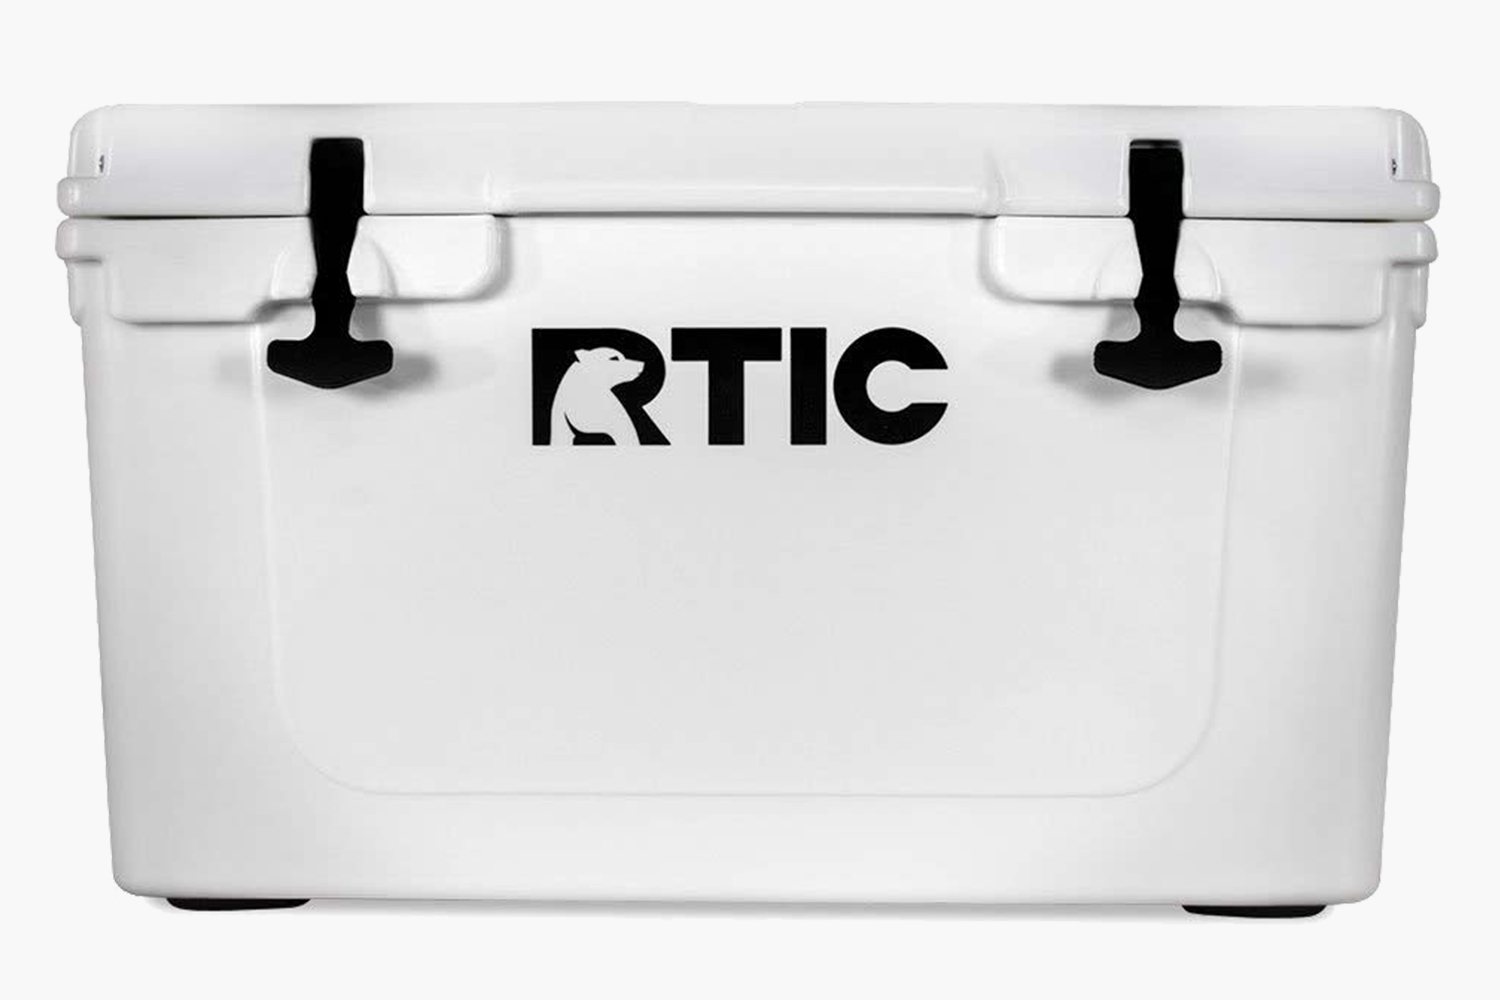 rtic coupons 2019